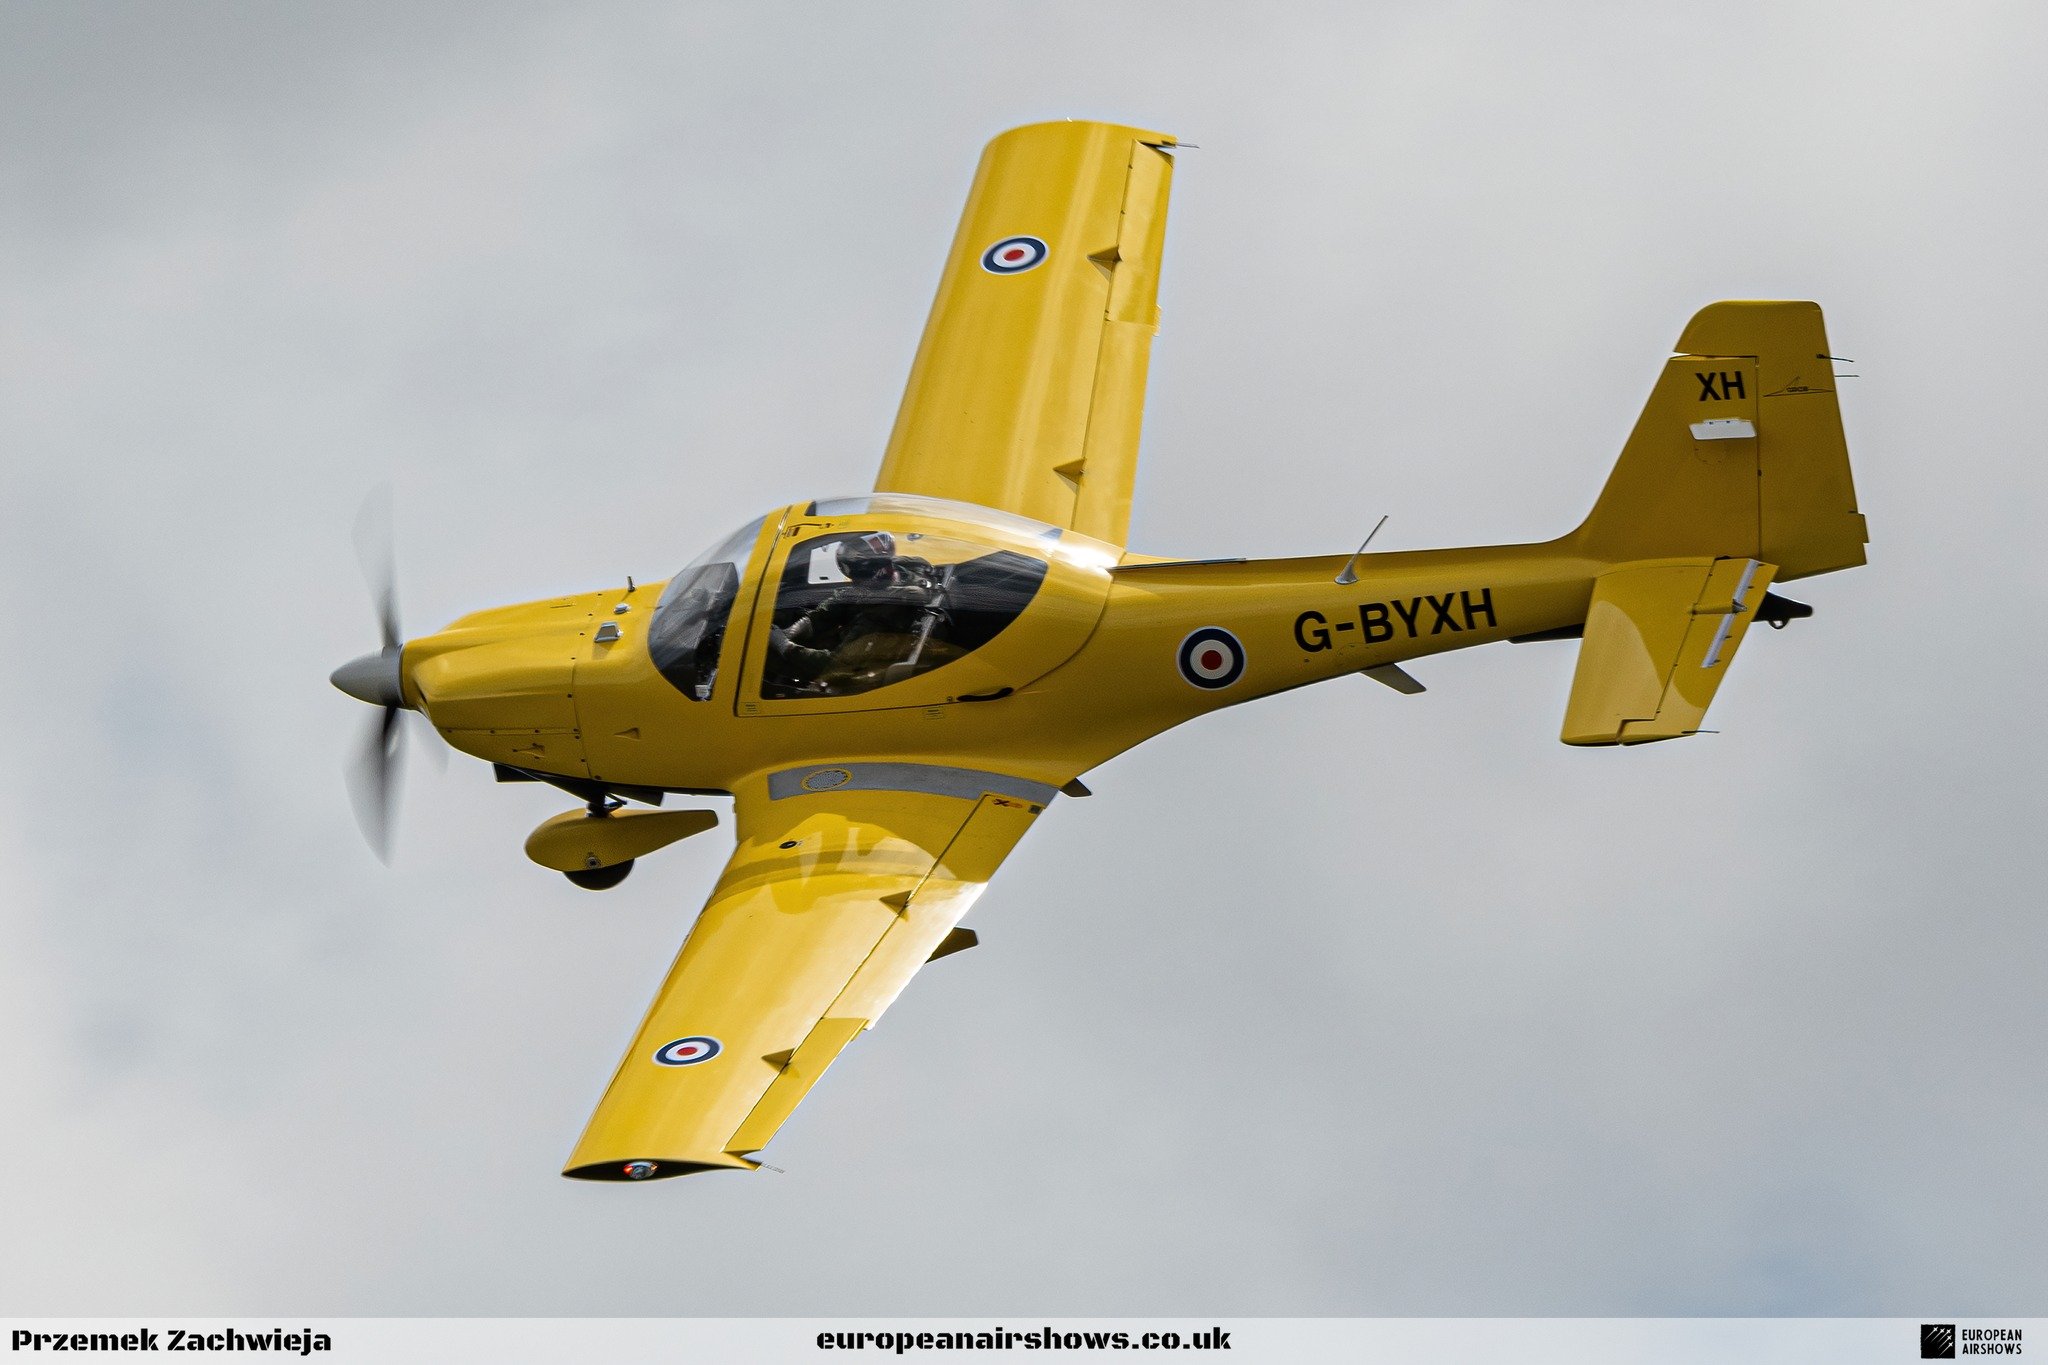 𝐀𝐈𝐑𝐒𝐇𝐎𝐖 𝐍𝐄𝐖𝐒: The Royal Air Force (RAF) Tutor Display Team has released an exciting schedule for its 2024 season, which promises to be full of thrilling aerial displays. The team has also announced that Flight Lieutenant Bob Dewes will be 